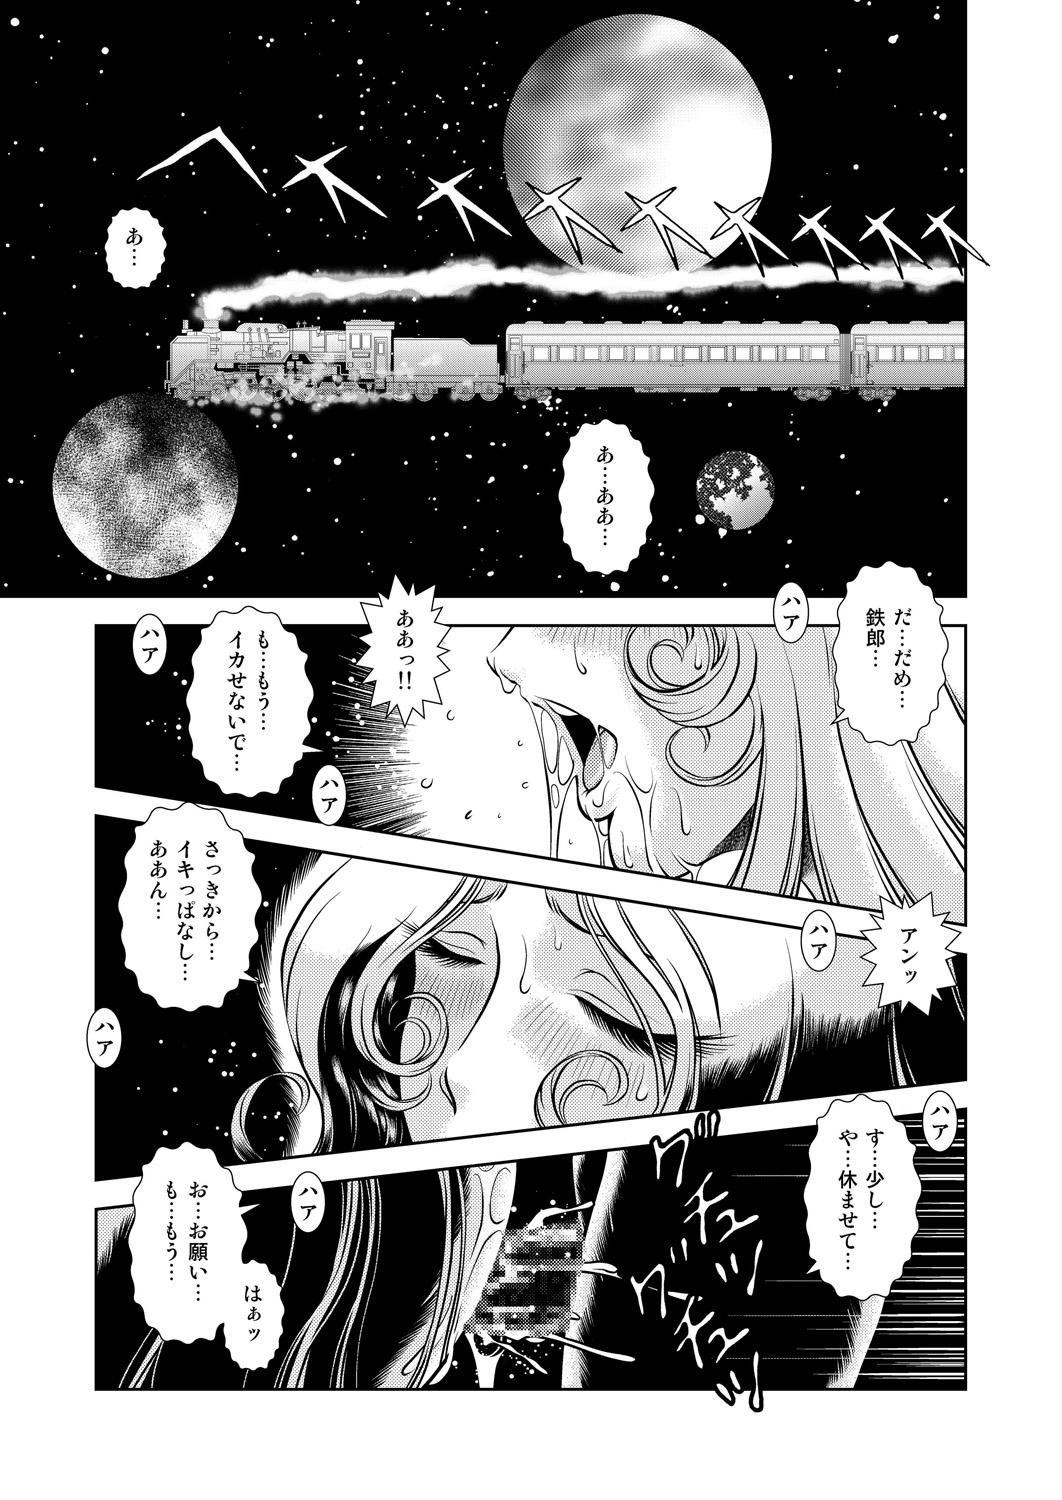 Spain Maetel Story 9 - Galaxy express 999 Classy - Page 3